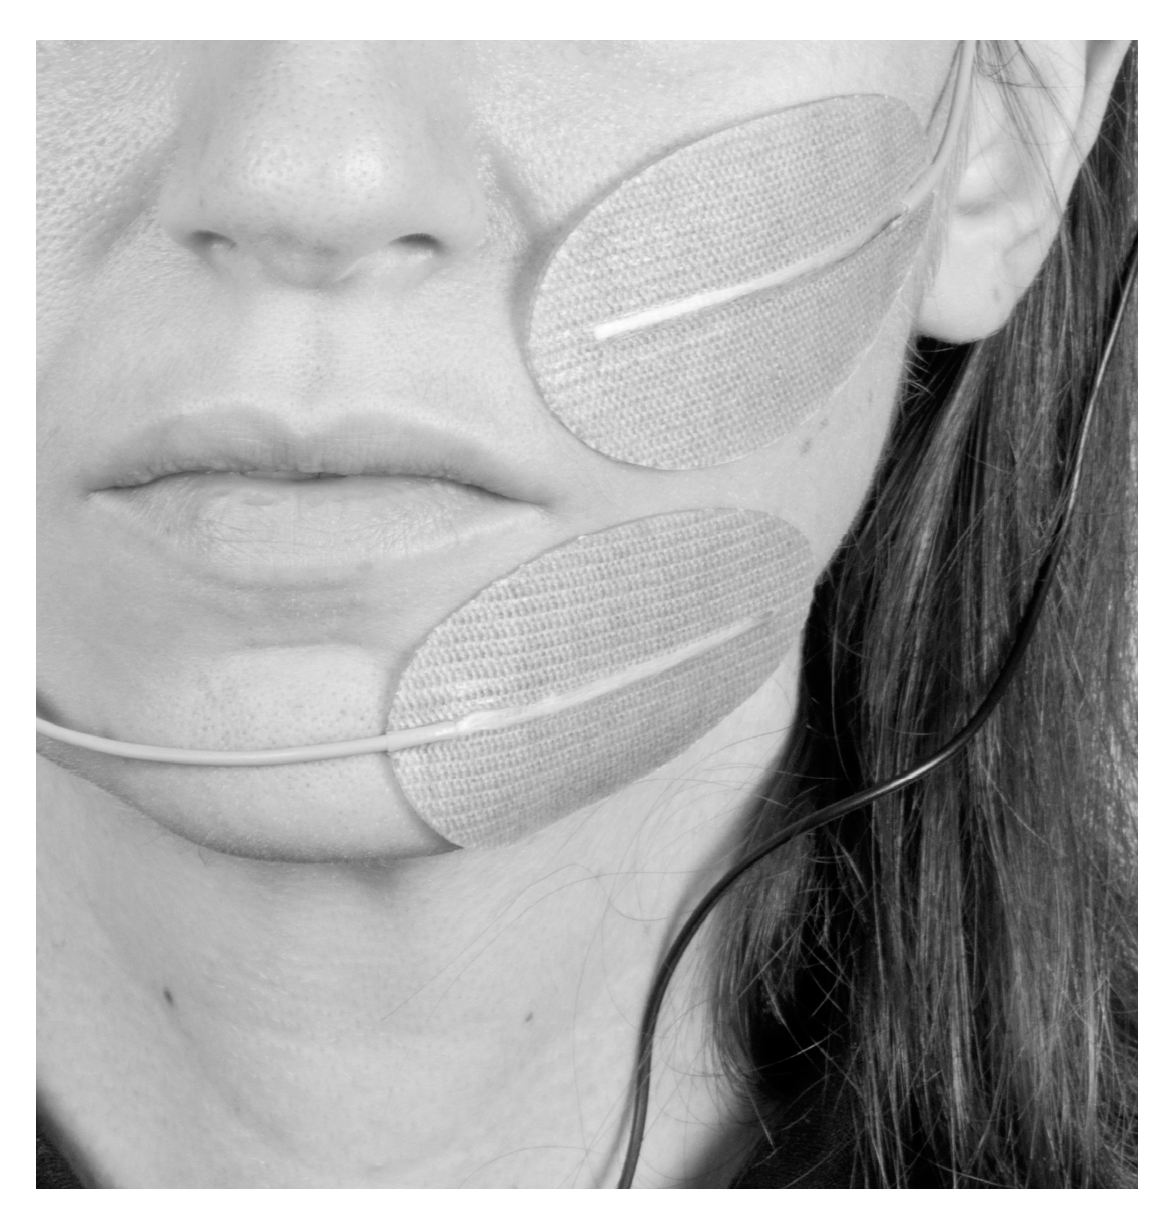 ELECTRICAL MUSCLE STIMULATION IN BELL'S PALSY